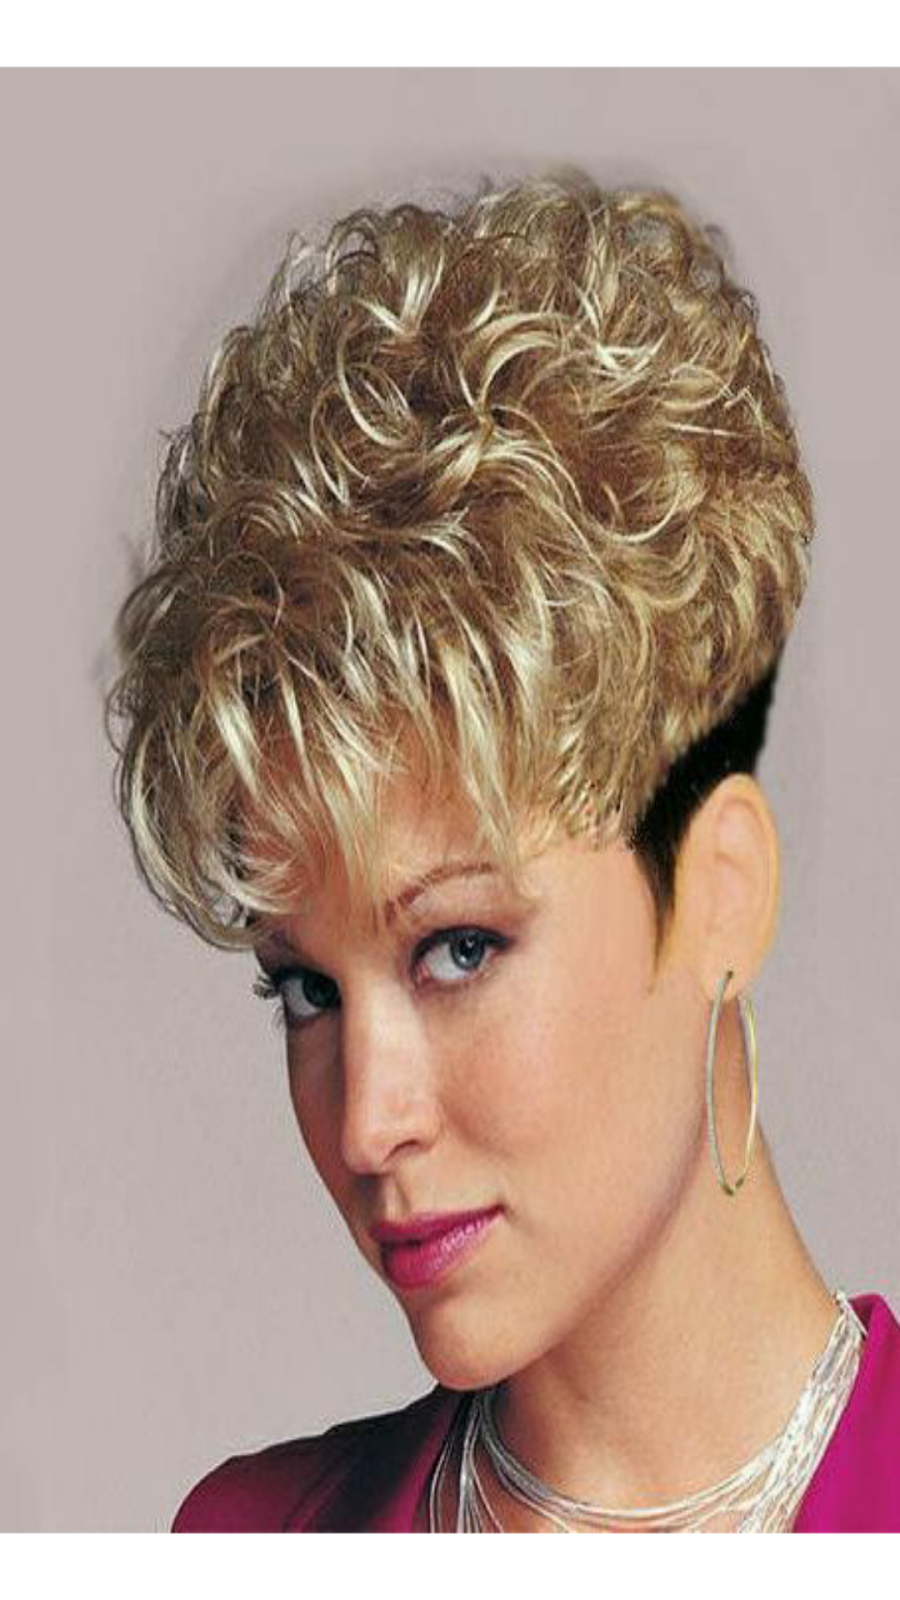 Short and curly cuts from 80's and 90's.